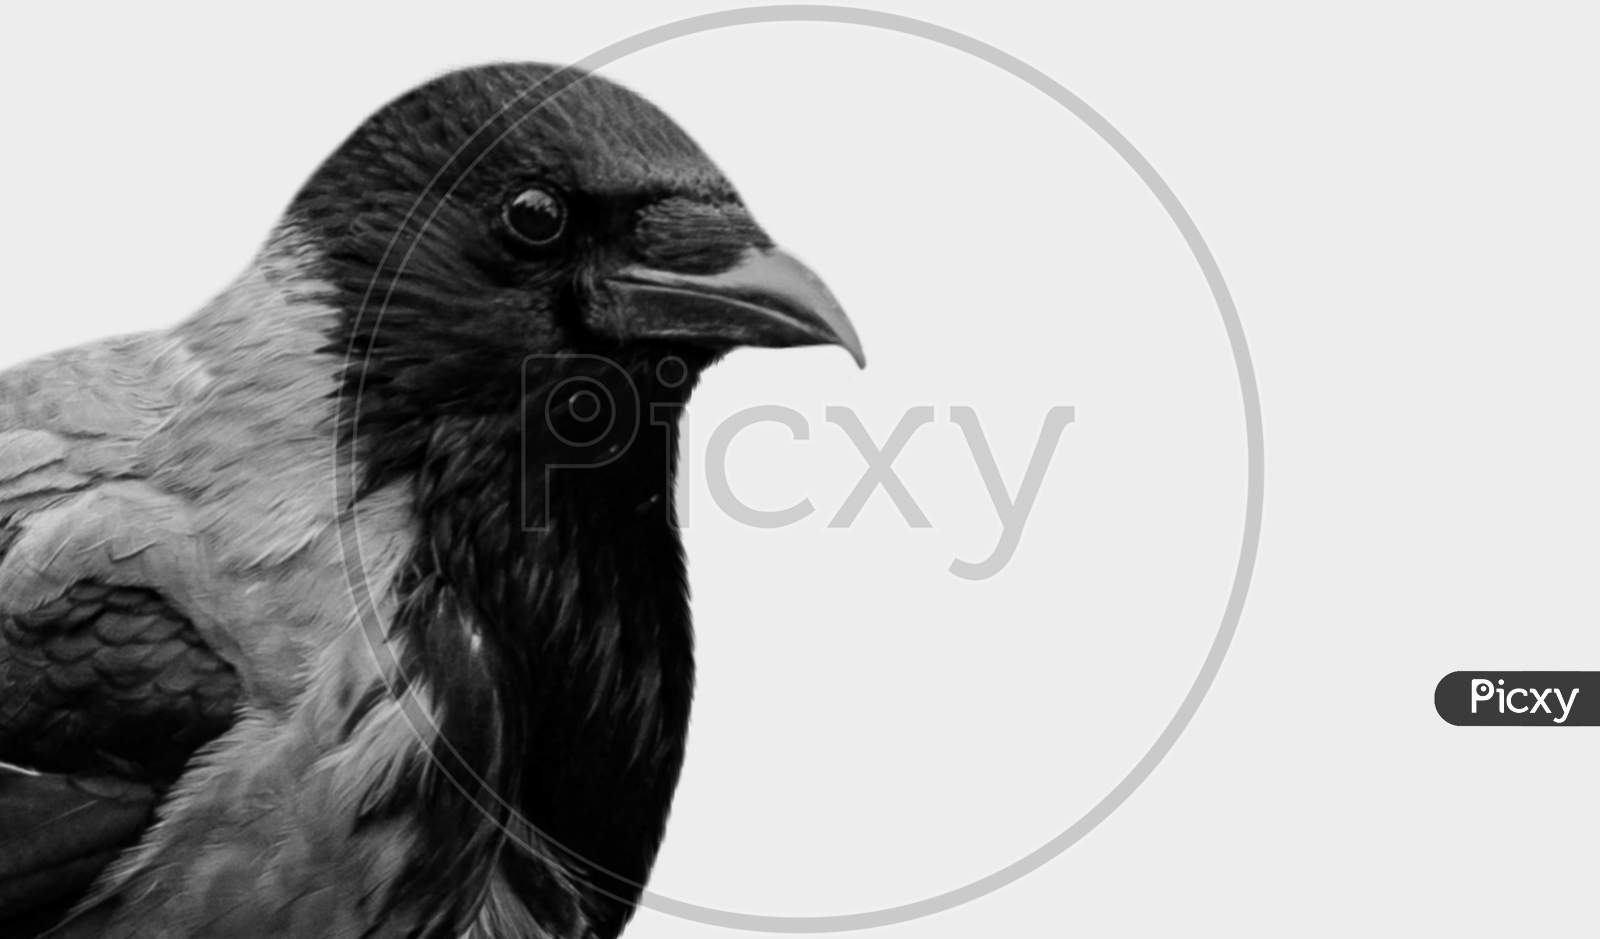 Black And White Crow Face In The White Background